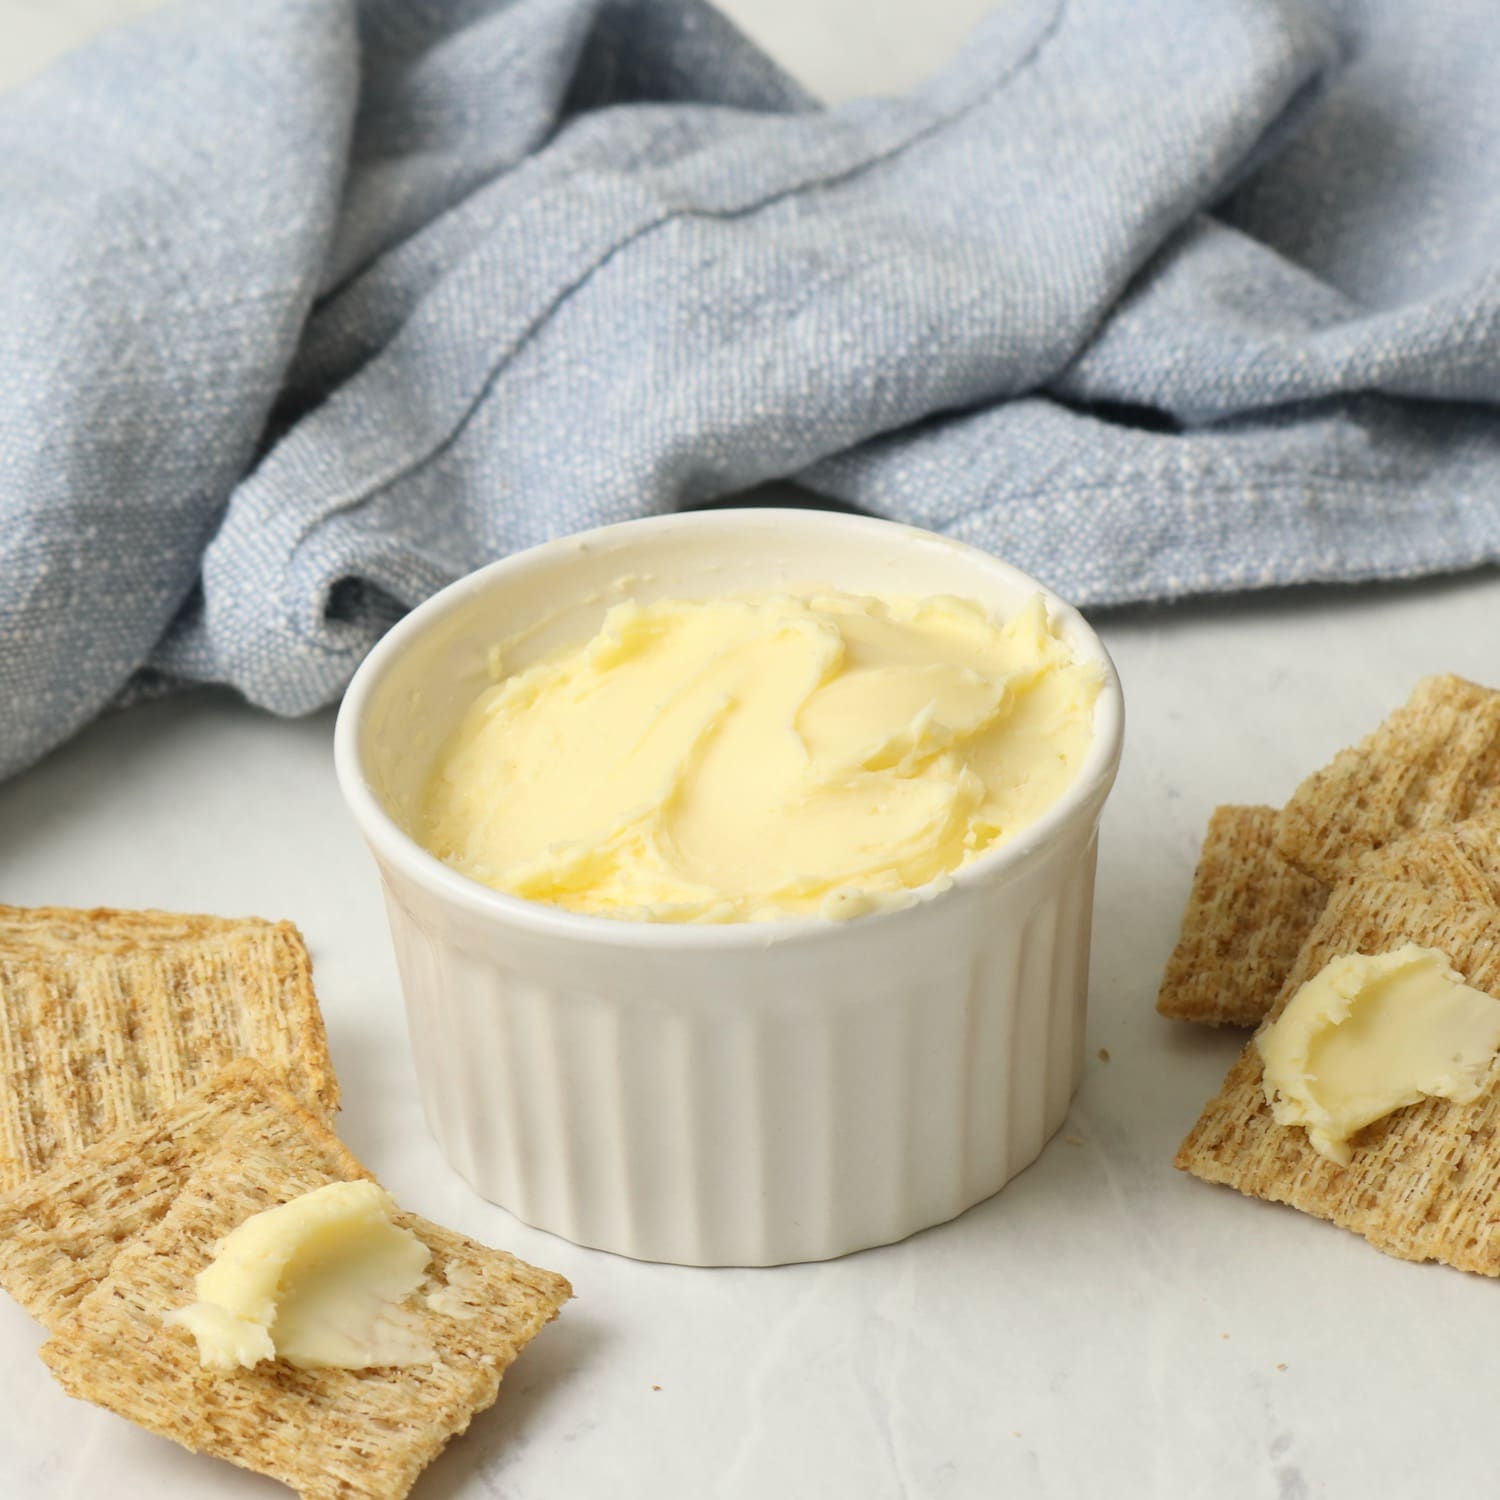 A dish of homemade butter on a marble surface, crackers spread with butter. Blue towel in background.